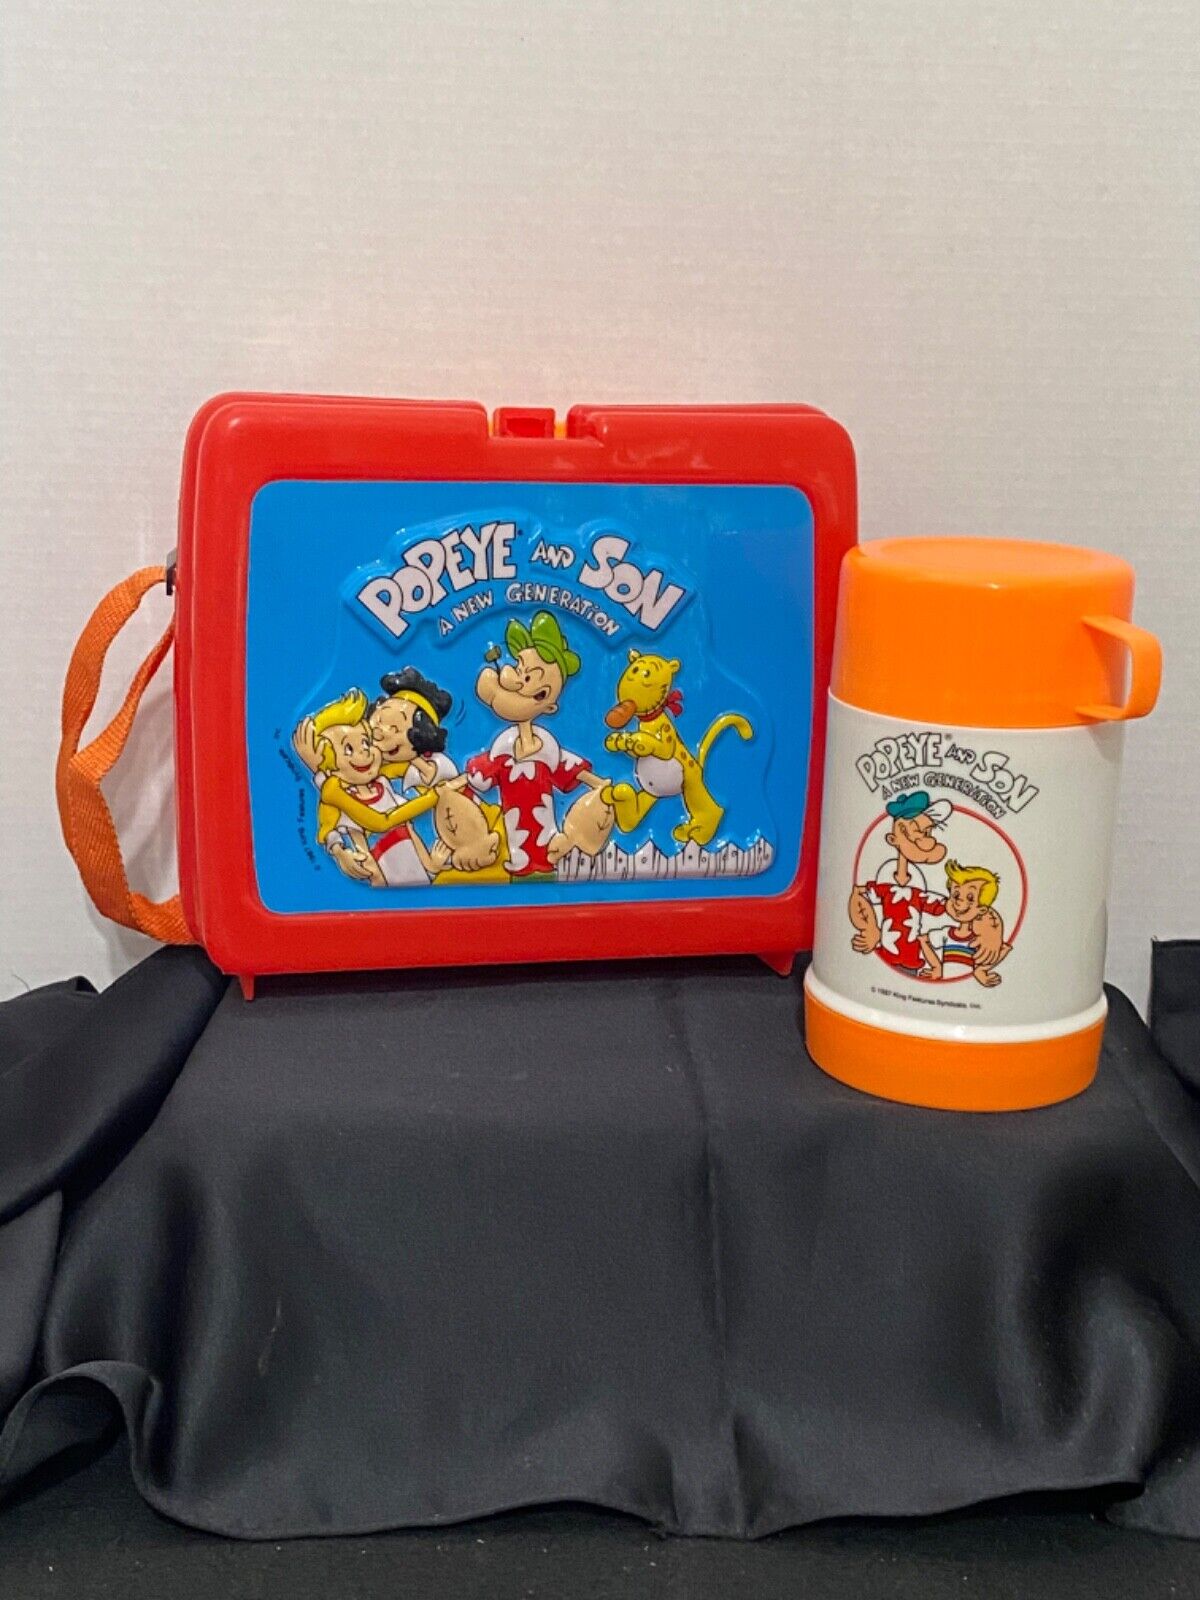 Popeye and Son A New Generation Plastic Lunch Box Kit w/Thermos Vintage 1987